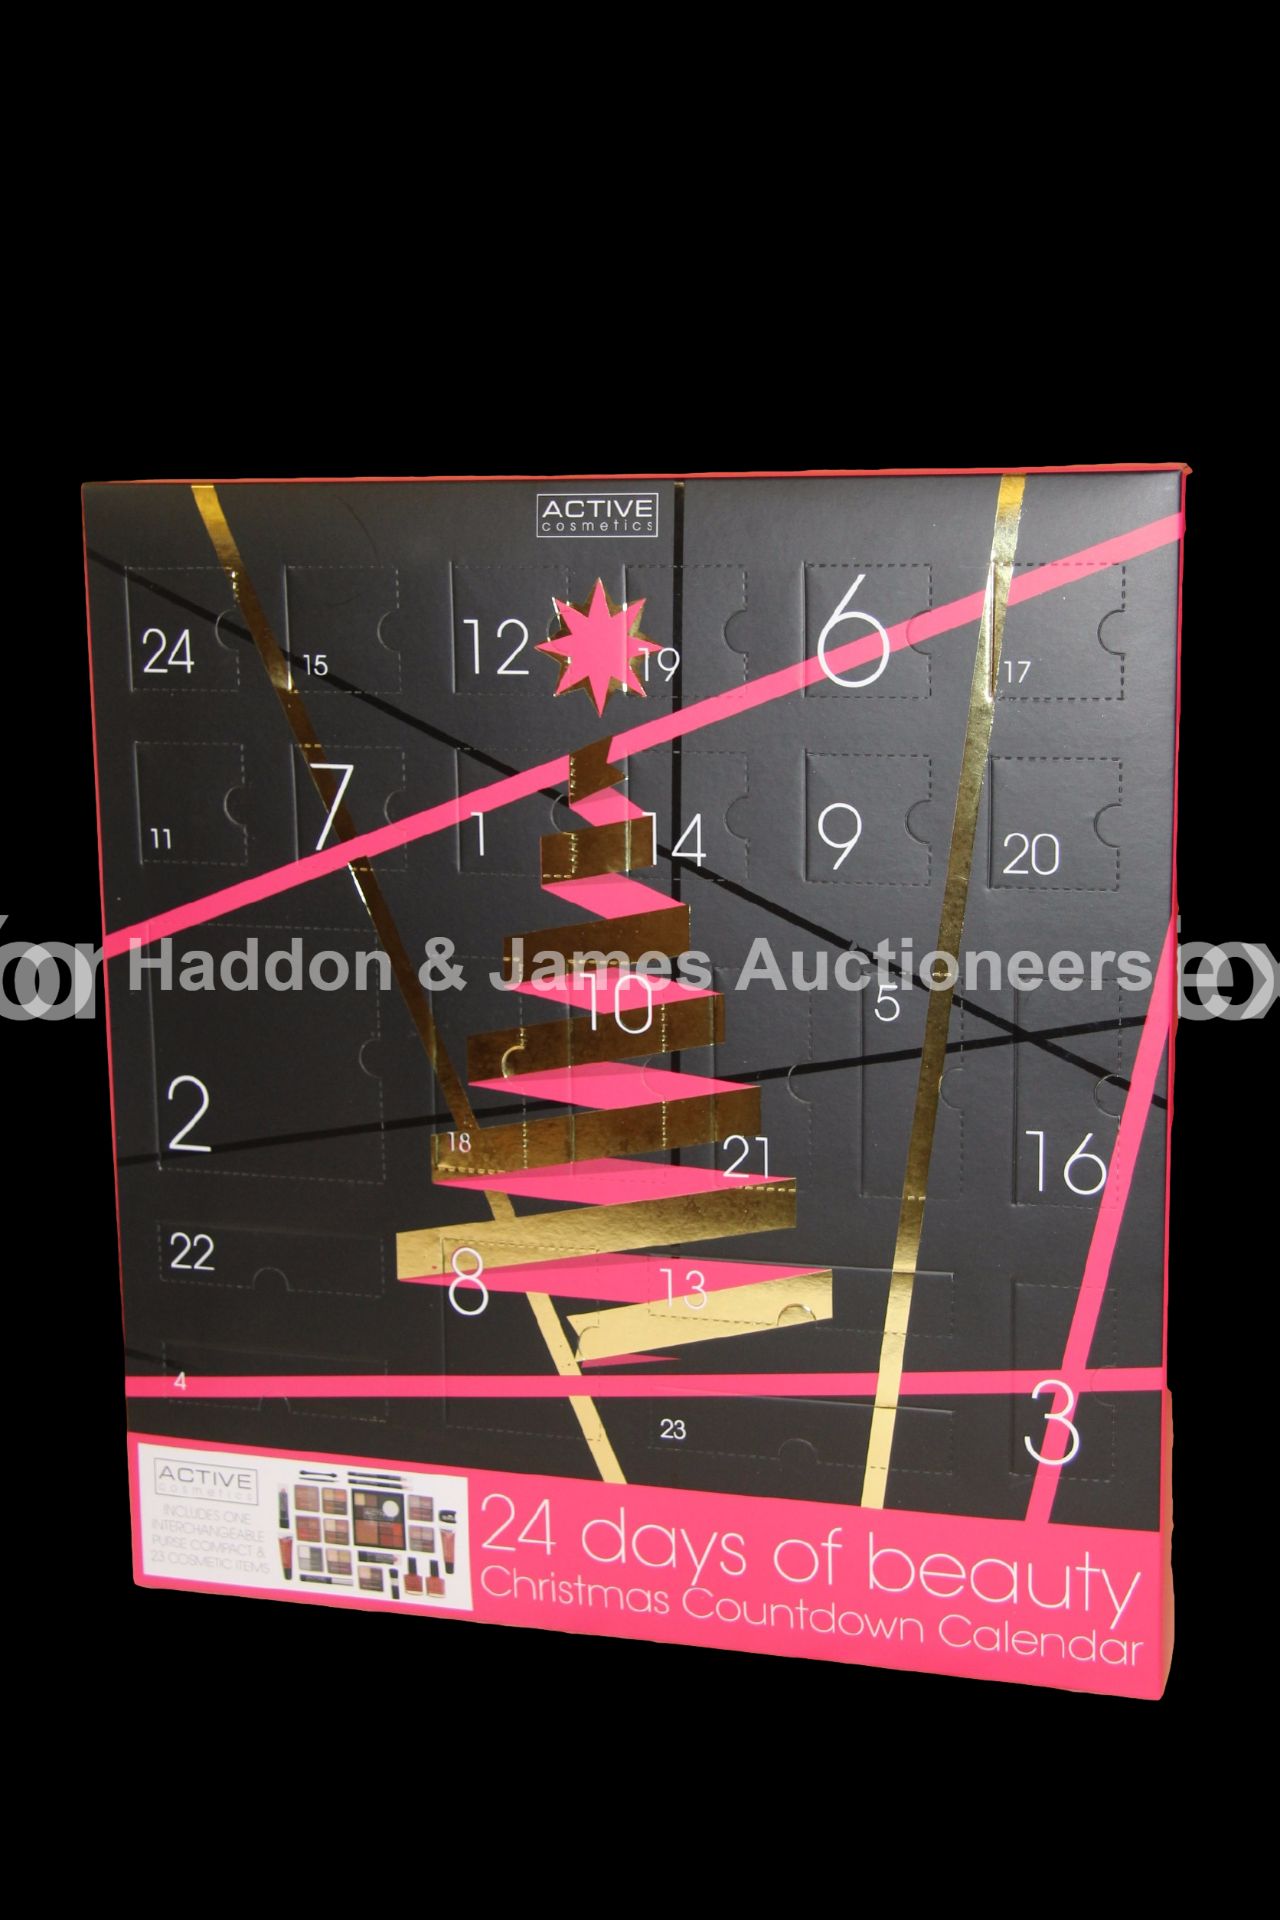 V Brand New Ex Lge Active Cosmetics set complete with Christmas  24 Days Of Beauty Calendar SRP39.99 - Image 2 of 2